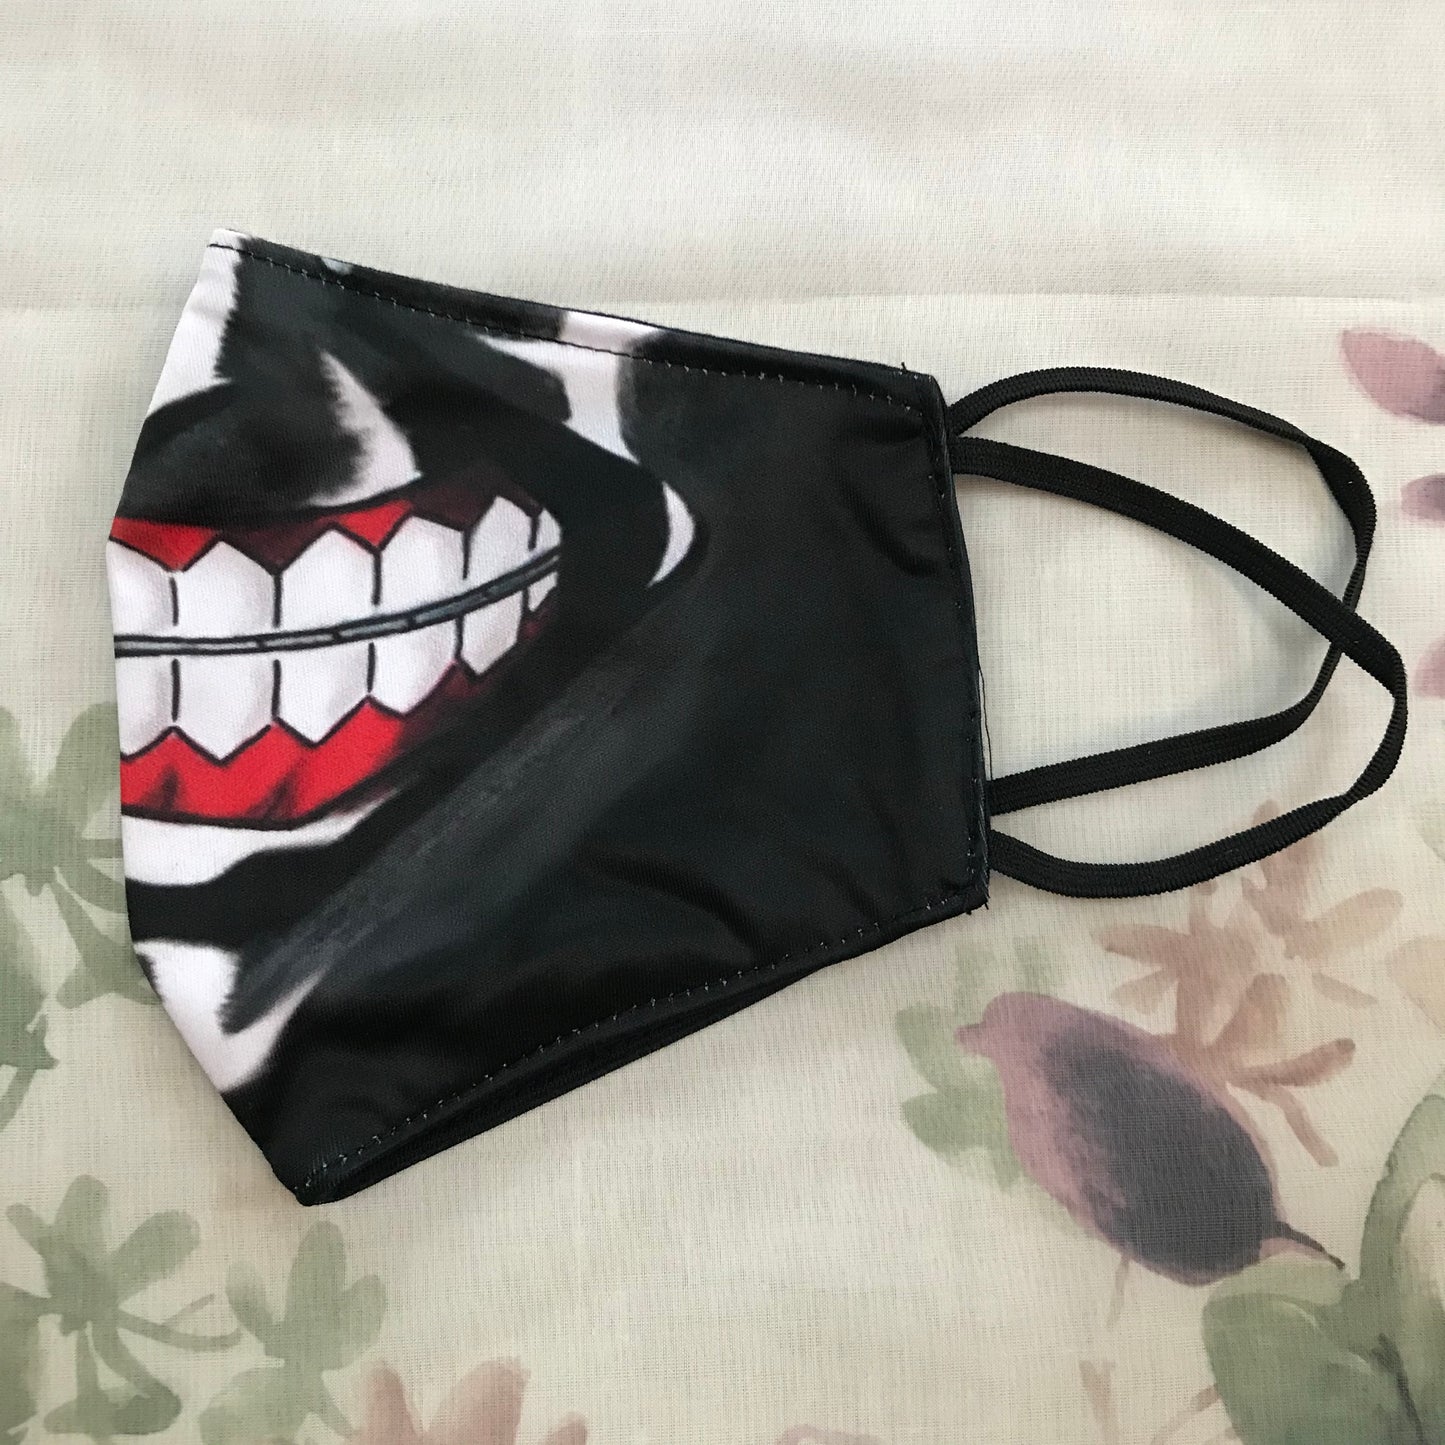 Tokyo Ghoul - face mask